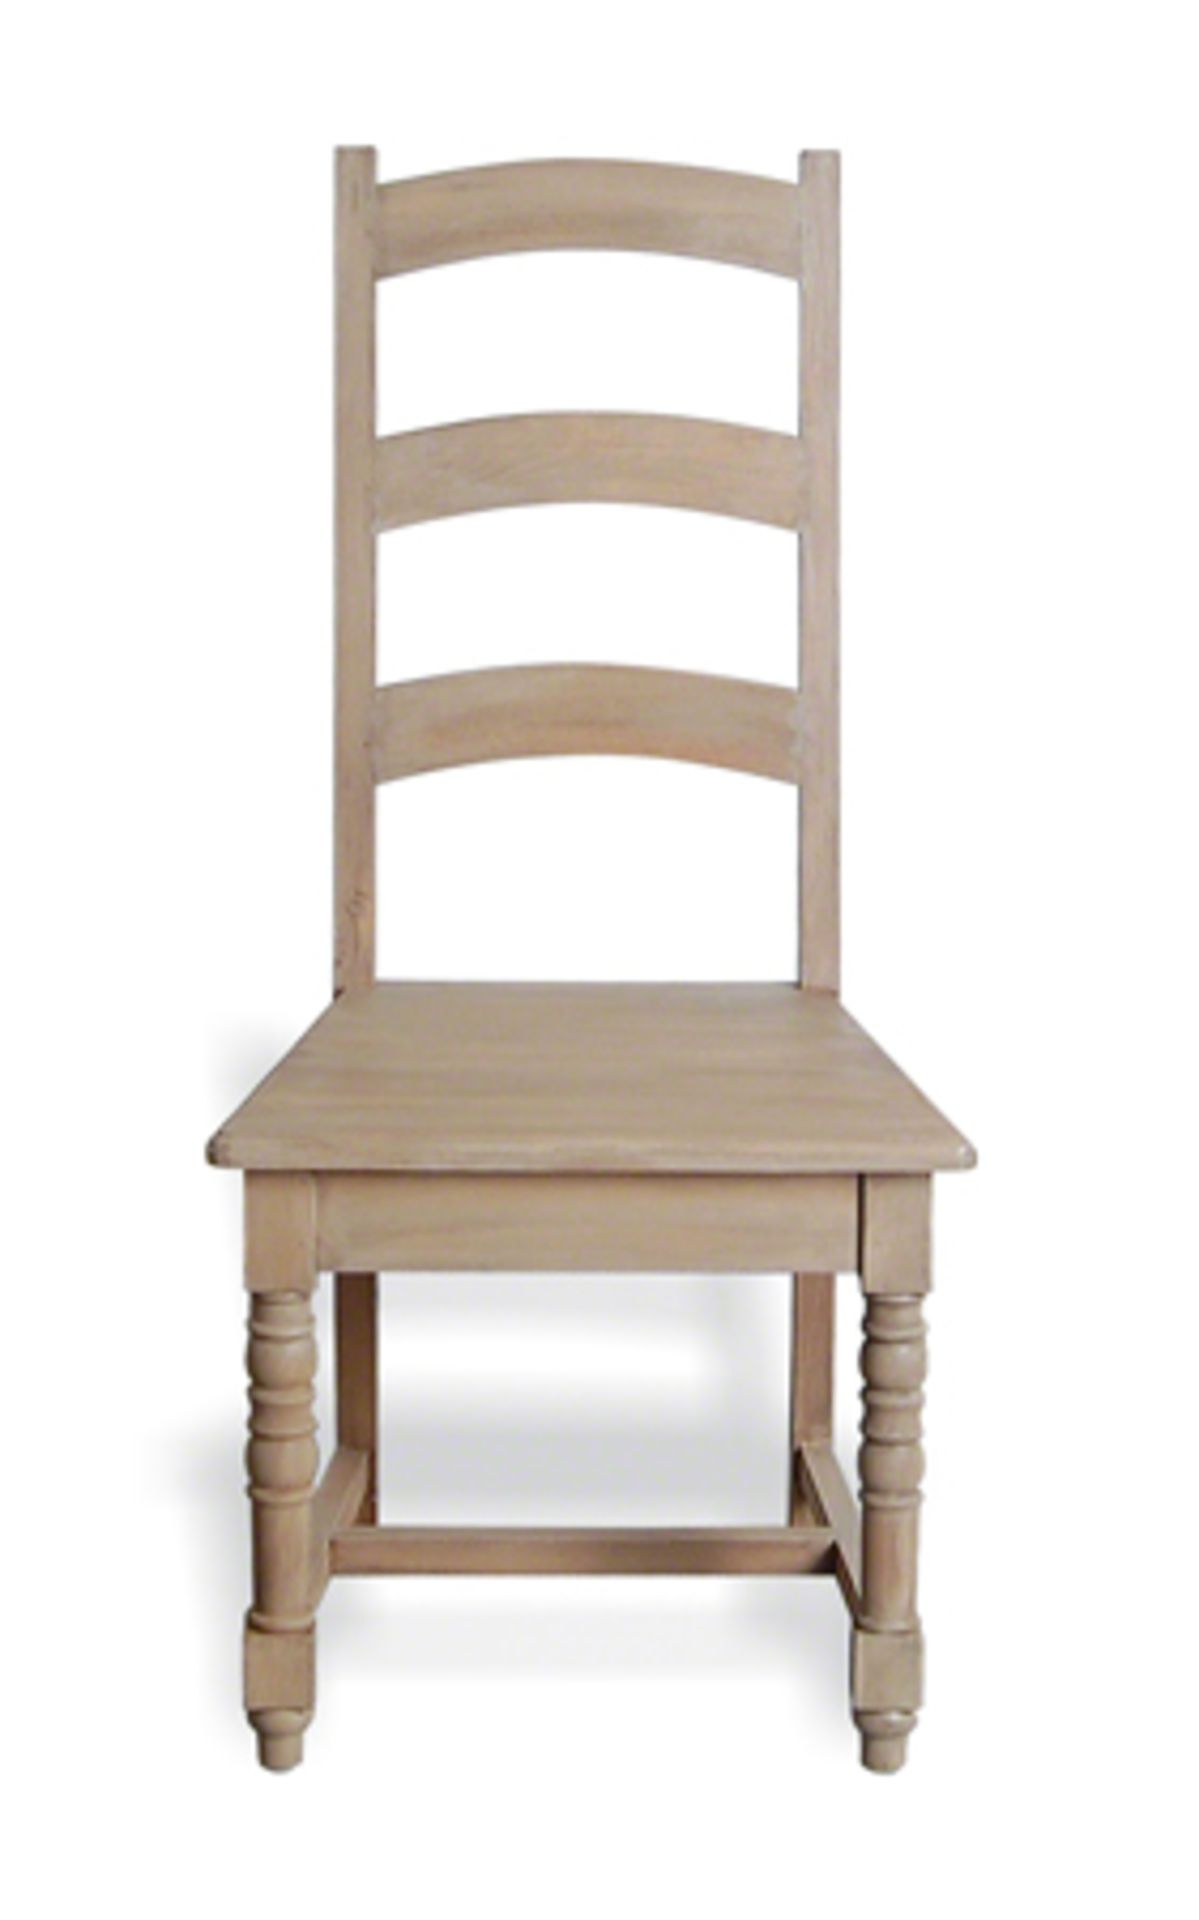 A Pair Of Solid Wood Rustic Pine Farmhouse Dining Chairs 57 X 55 X 108cm (Loc Cob273) - Image 7 of 7